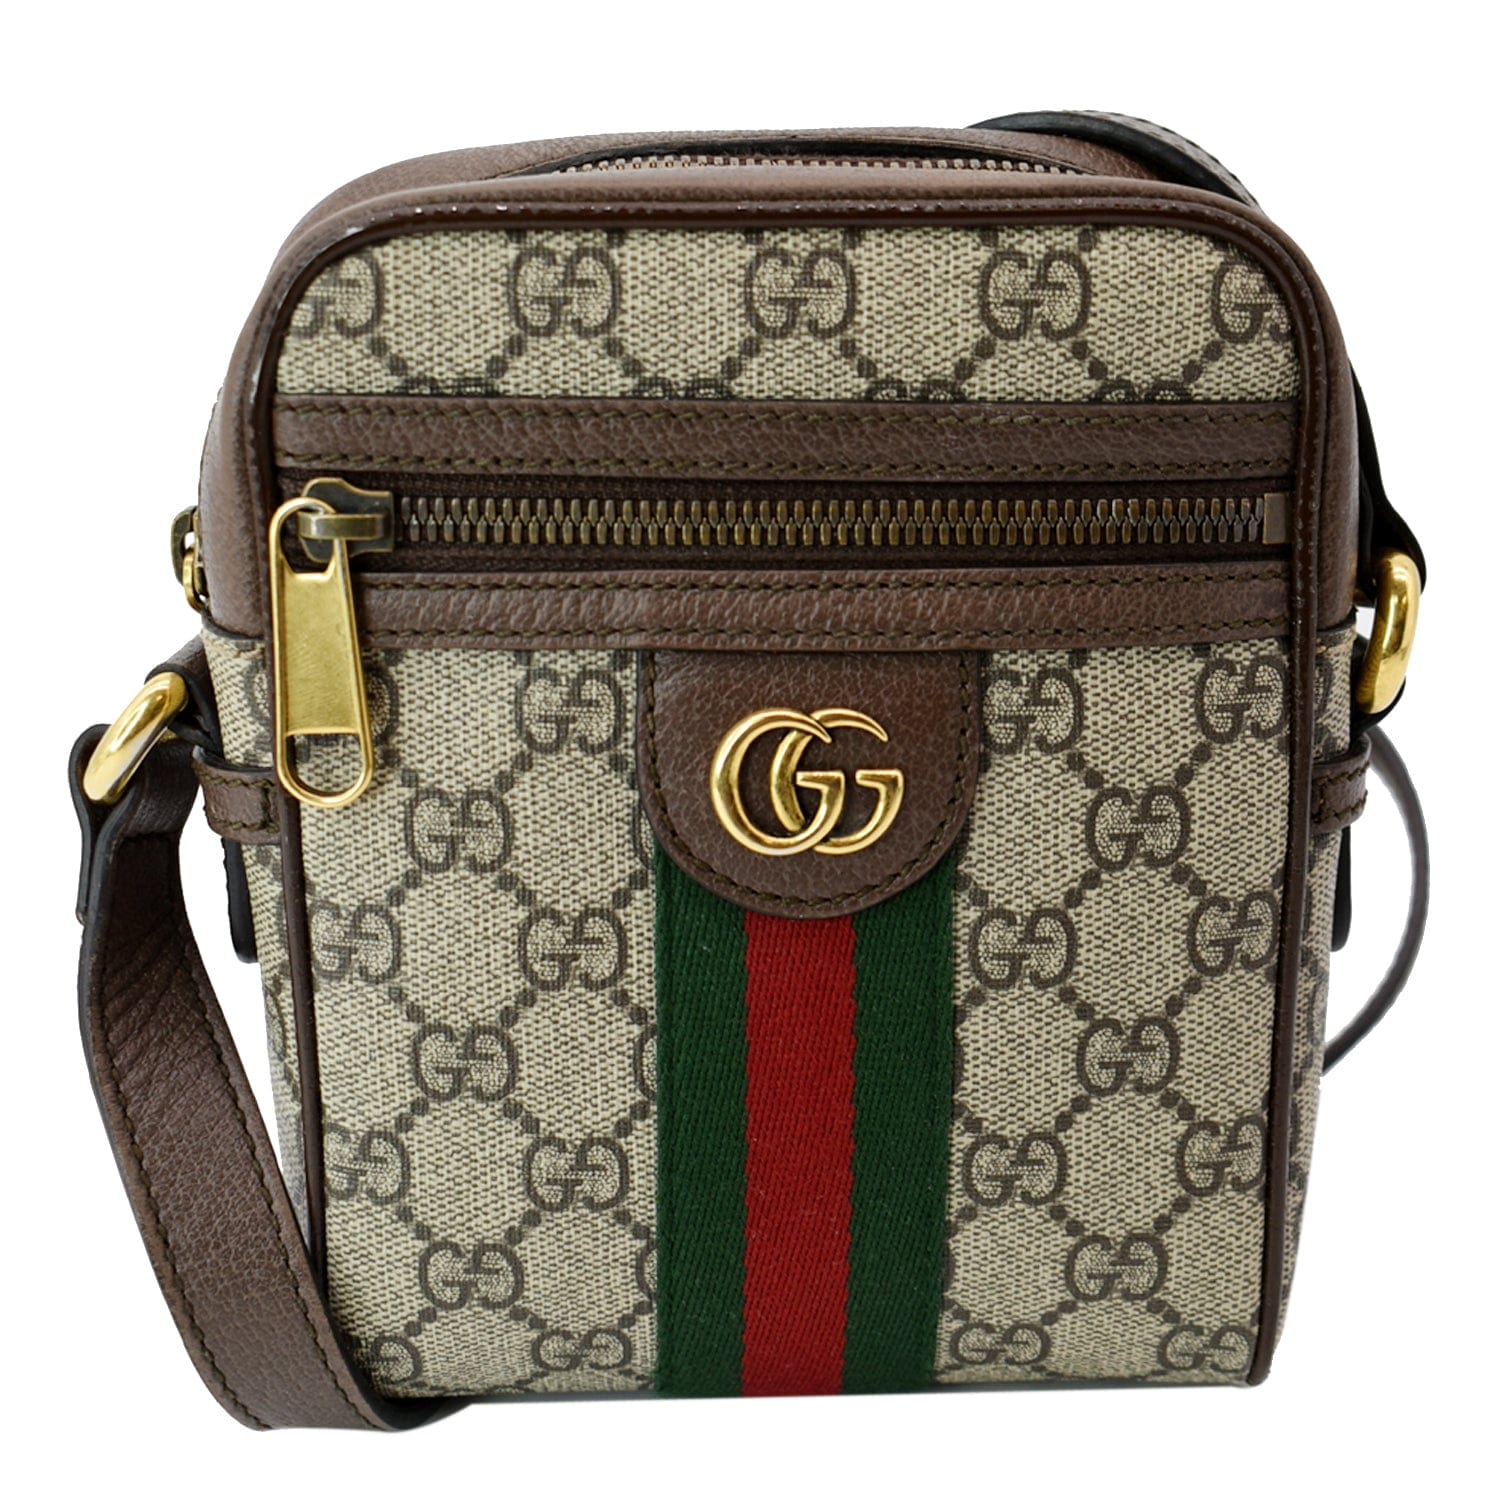 Gucci - Ophidia Gg-Canvas Shoulder Bag - Womens - Beige Multi for